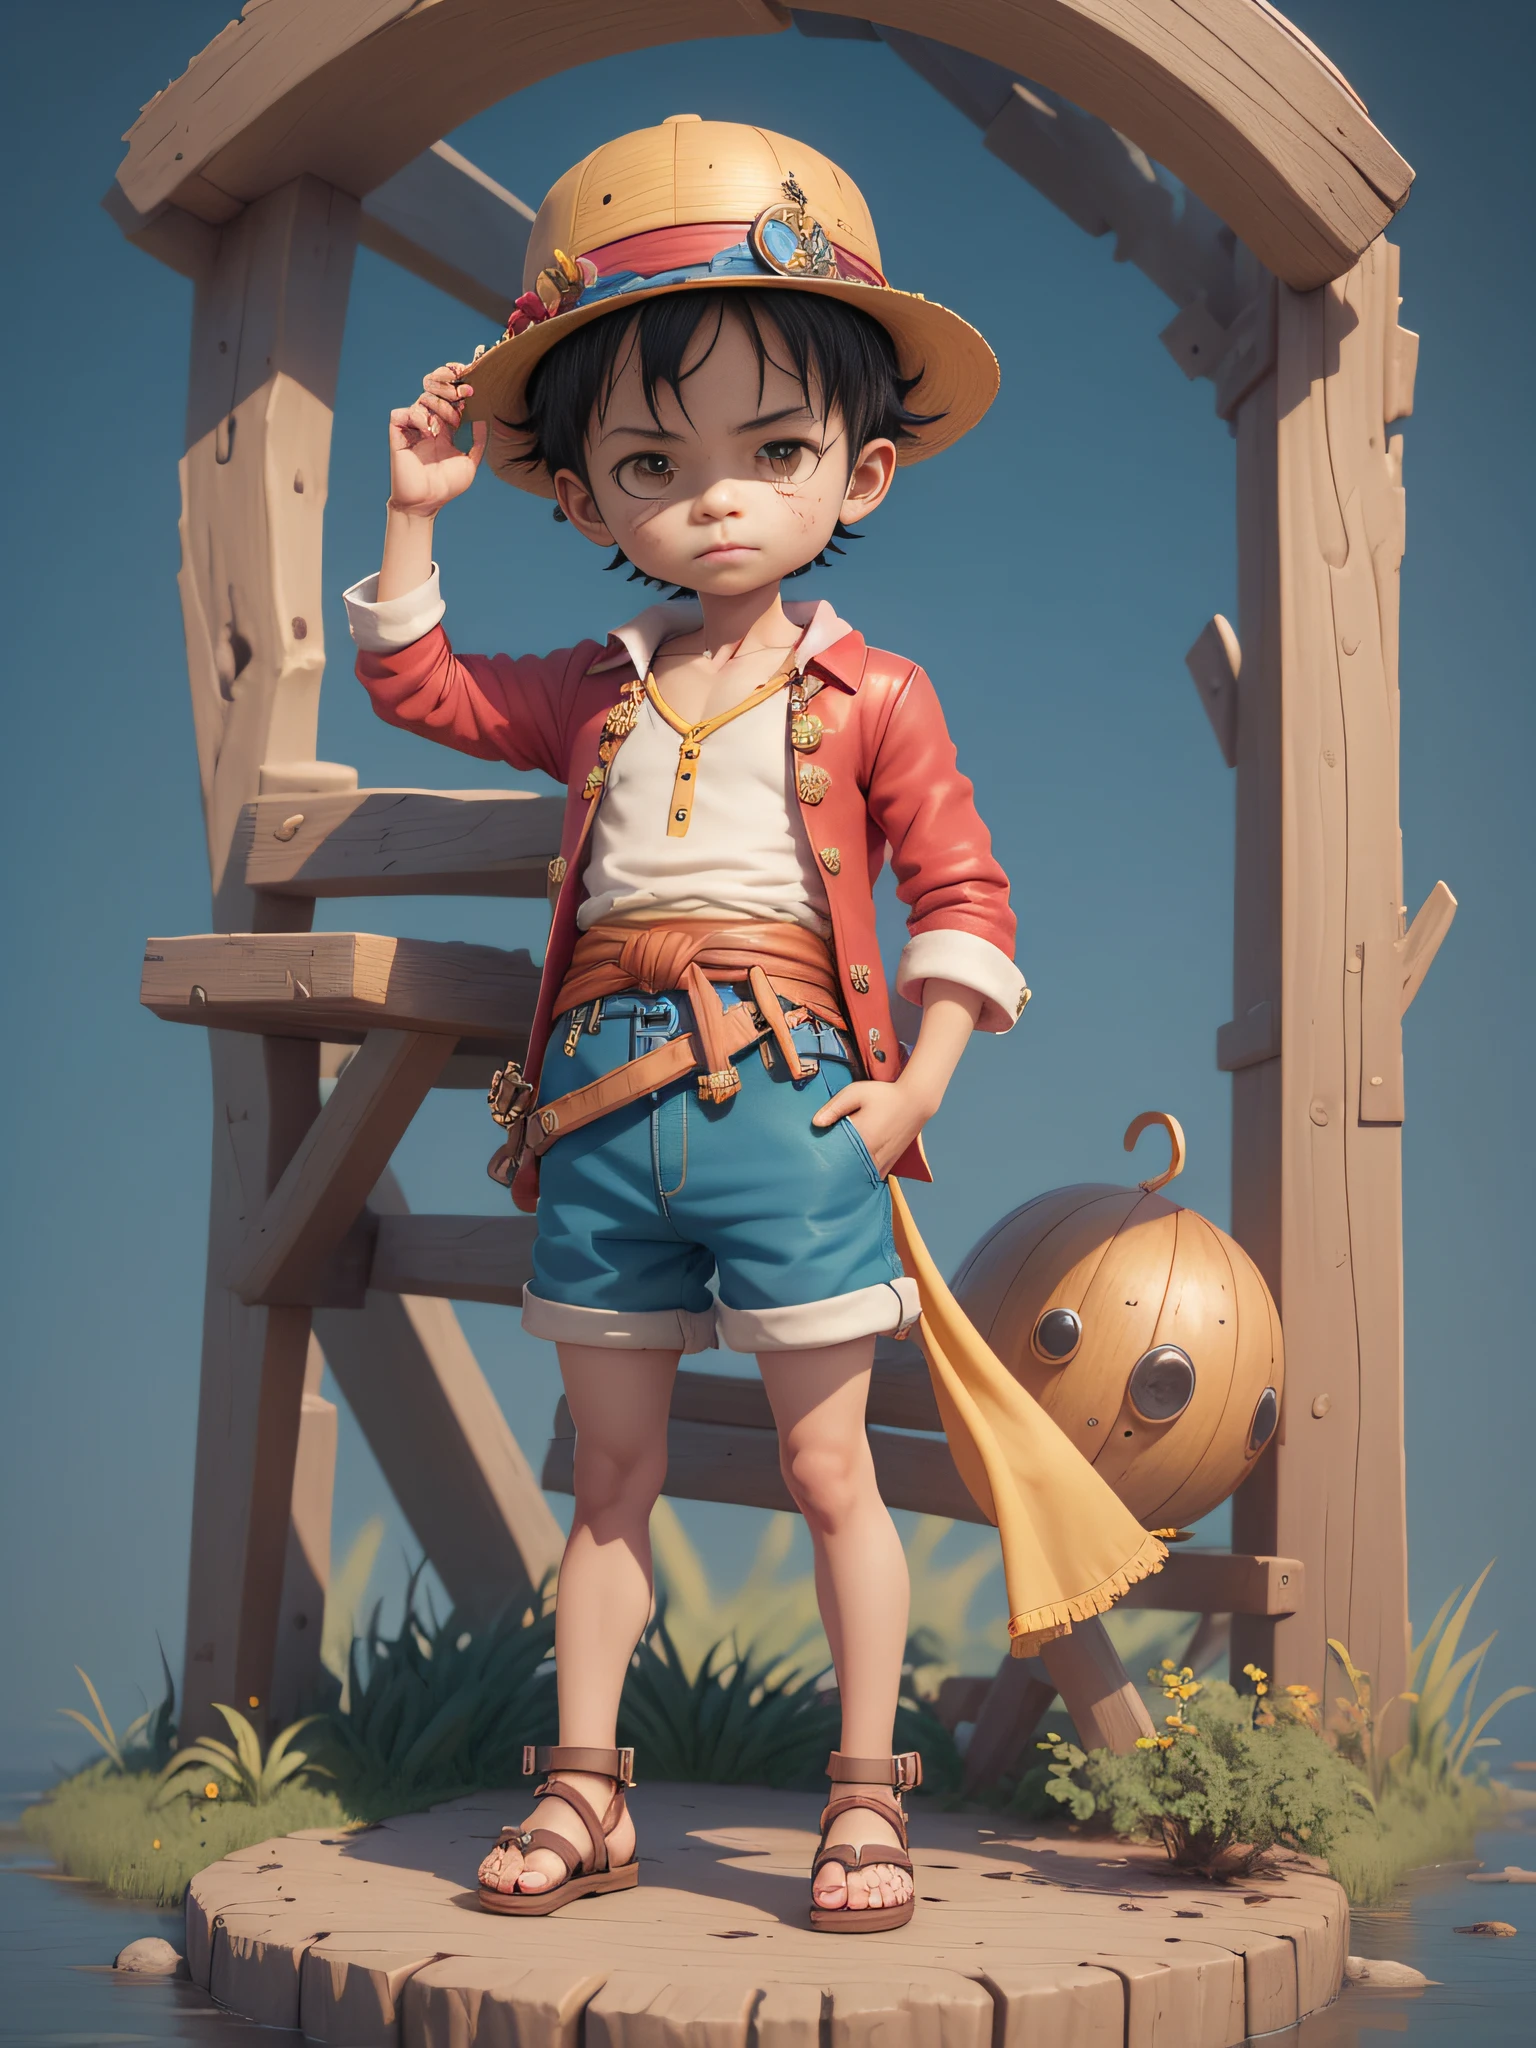 cute 3d render, cute detailed digital art, male explorer mini cute boy, cute digital painting, stylized 3d render, cute digital art, cute render 3d anime boy, luffy the little pirate looks up, cute! c4d, portrait anime sea pirate boy, ((he is wearing an open long-sleeved red cardigan with four buttons, with a yellow sash tied around his waist, blue shorts with cuffs, sandals)), ((standing in a pirate ship)).